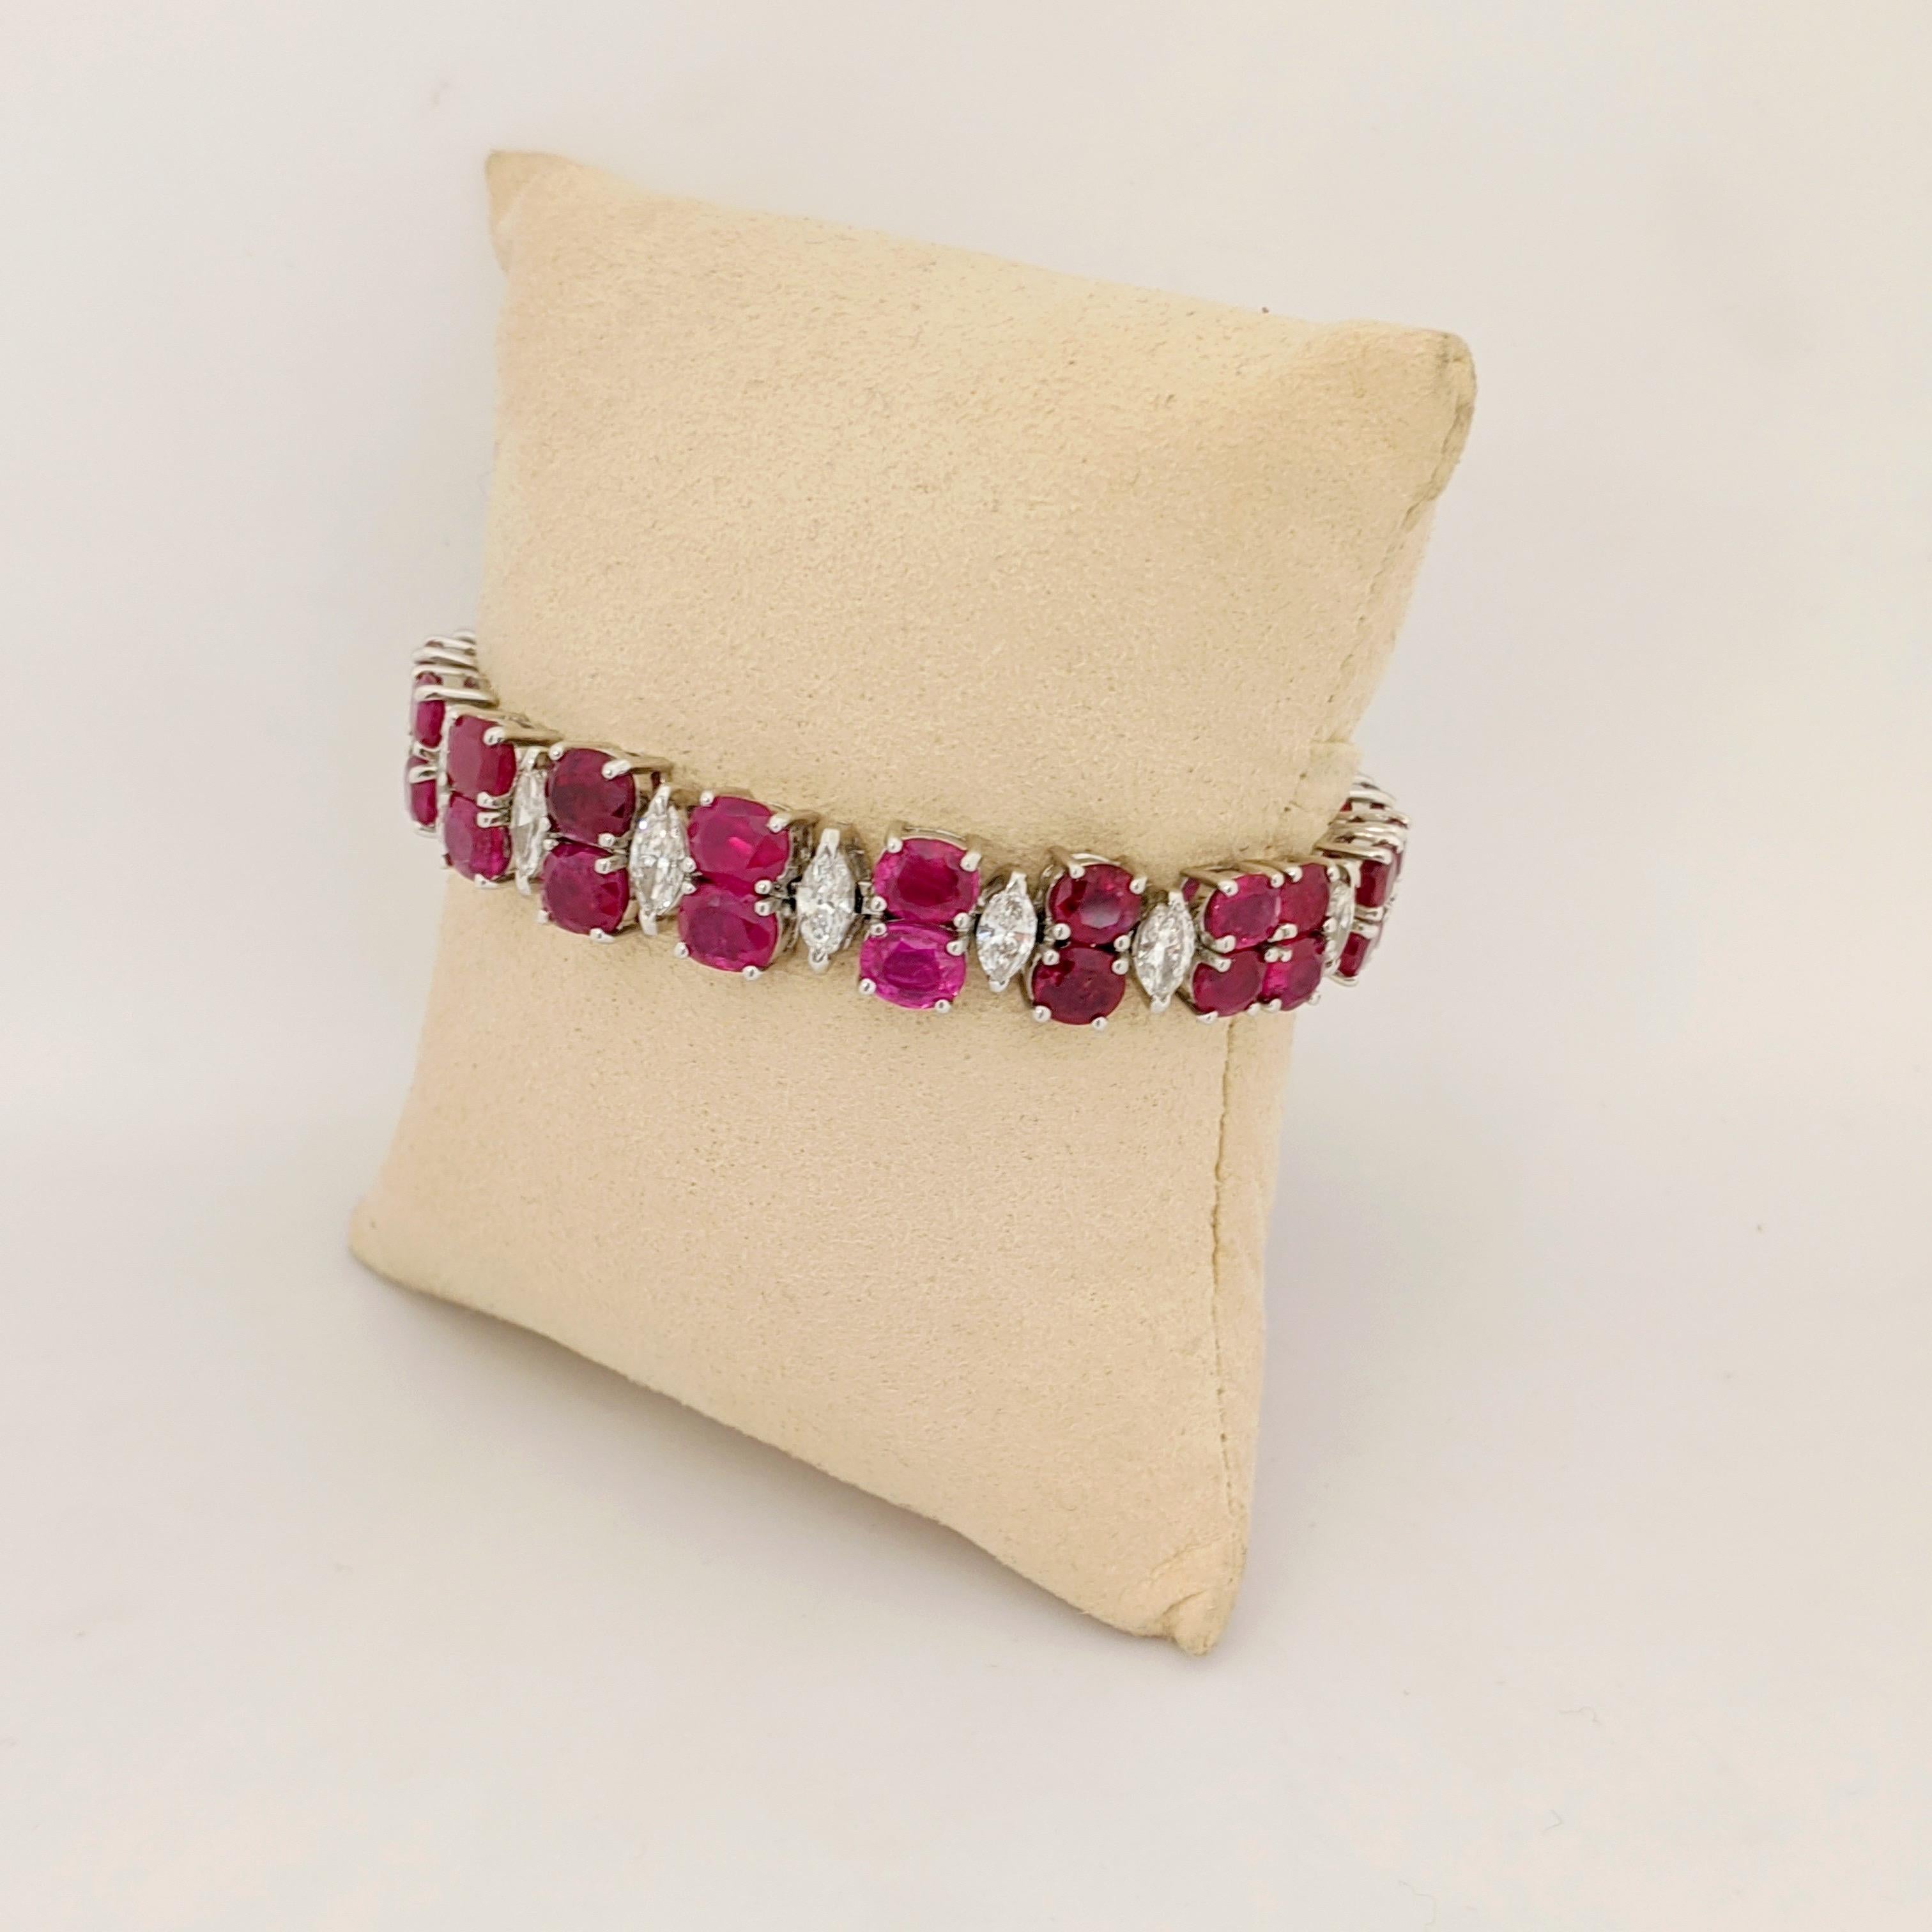 AN IMPORTANT RUBY AND DIAMOND BRACELET.
 The graduating bracelet is designed with  two rows of oval Burmese Rubies with single Marquis Diamond connections. The magnificent stones are set in a handmade Platinum bracelet mounting made exclusively for